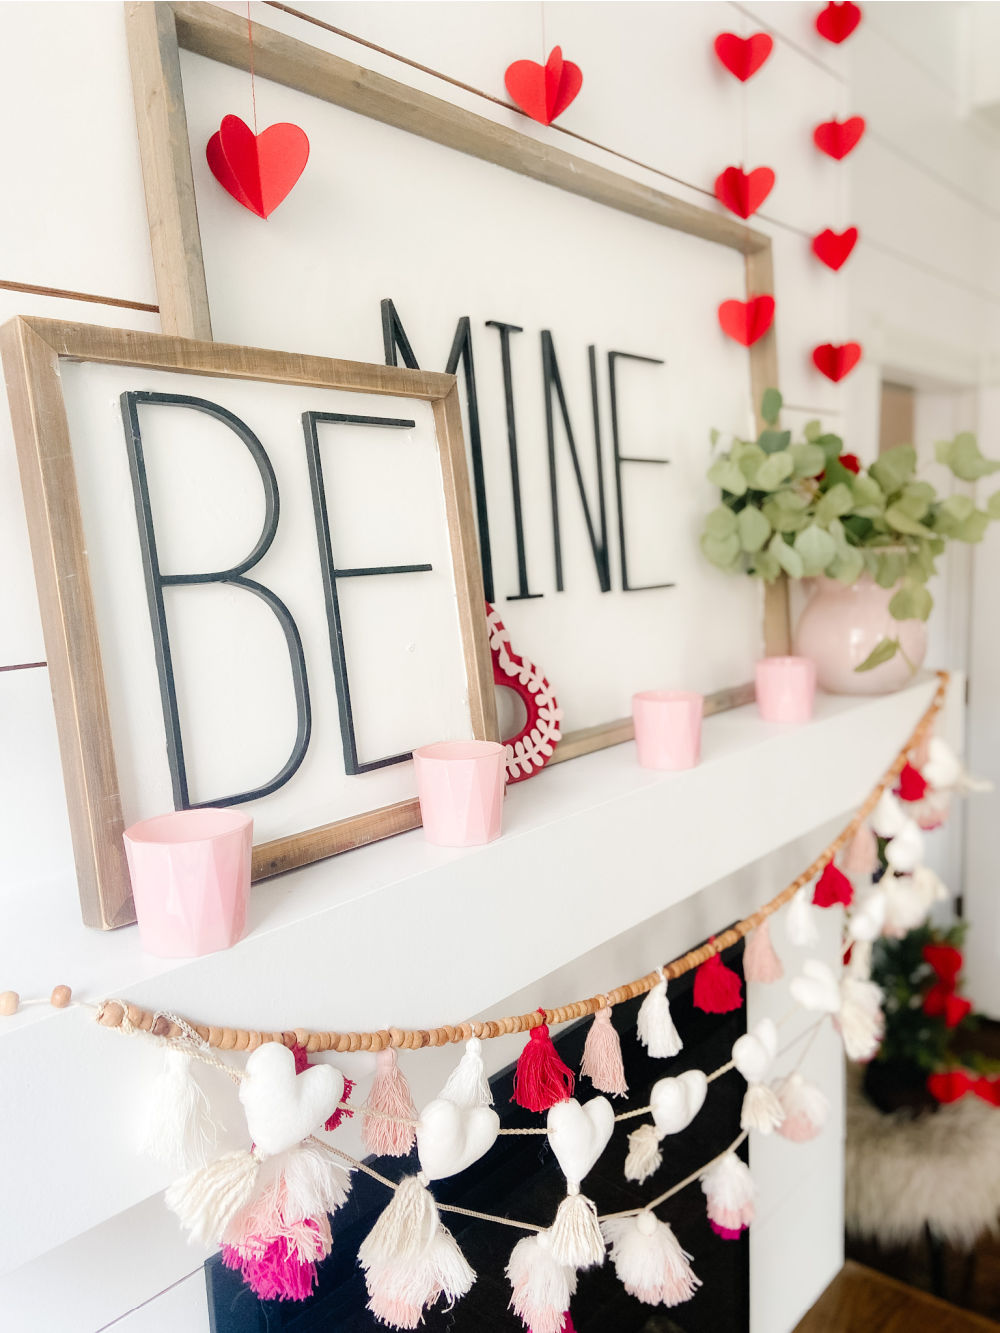 Be Mine Valentine Mantel Ideas. Create some DIY Valentine's signs, hang festive banners two ways and add hearts to a tree for colorful Valentine's Day decor! 